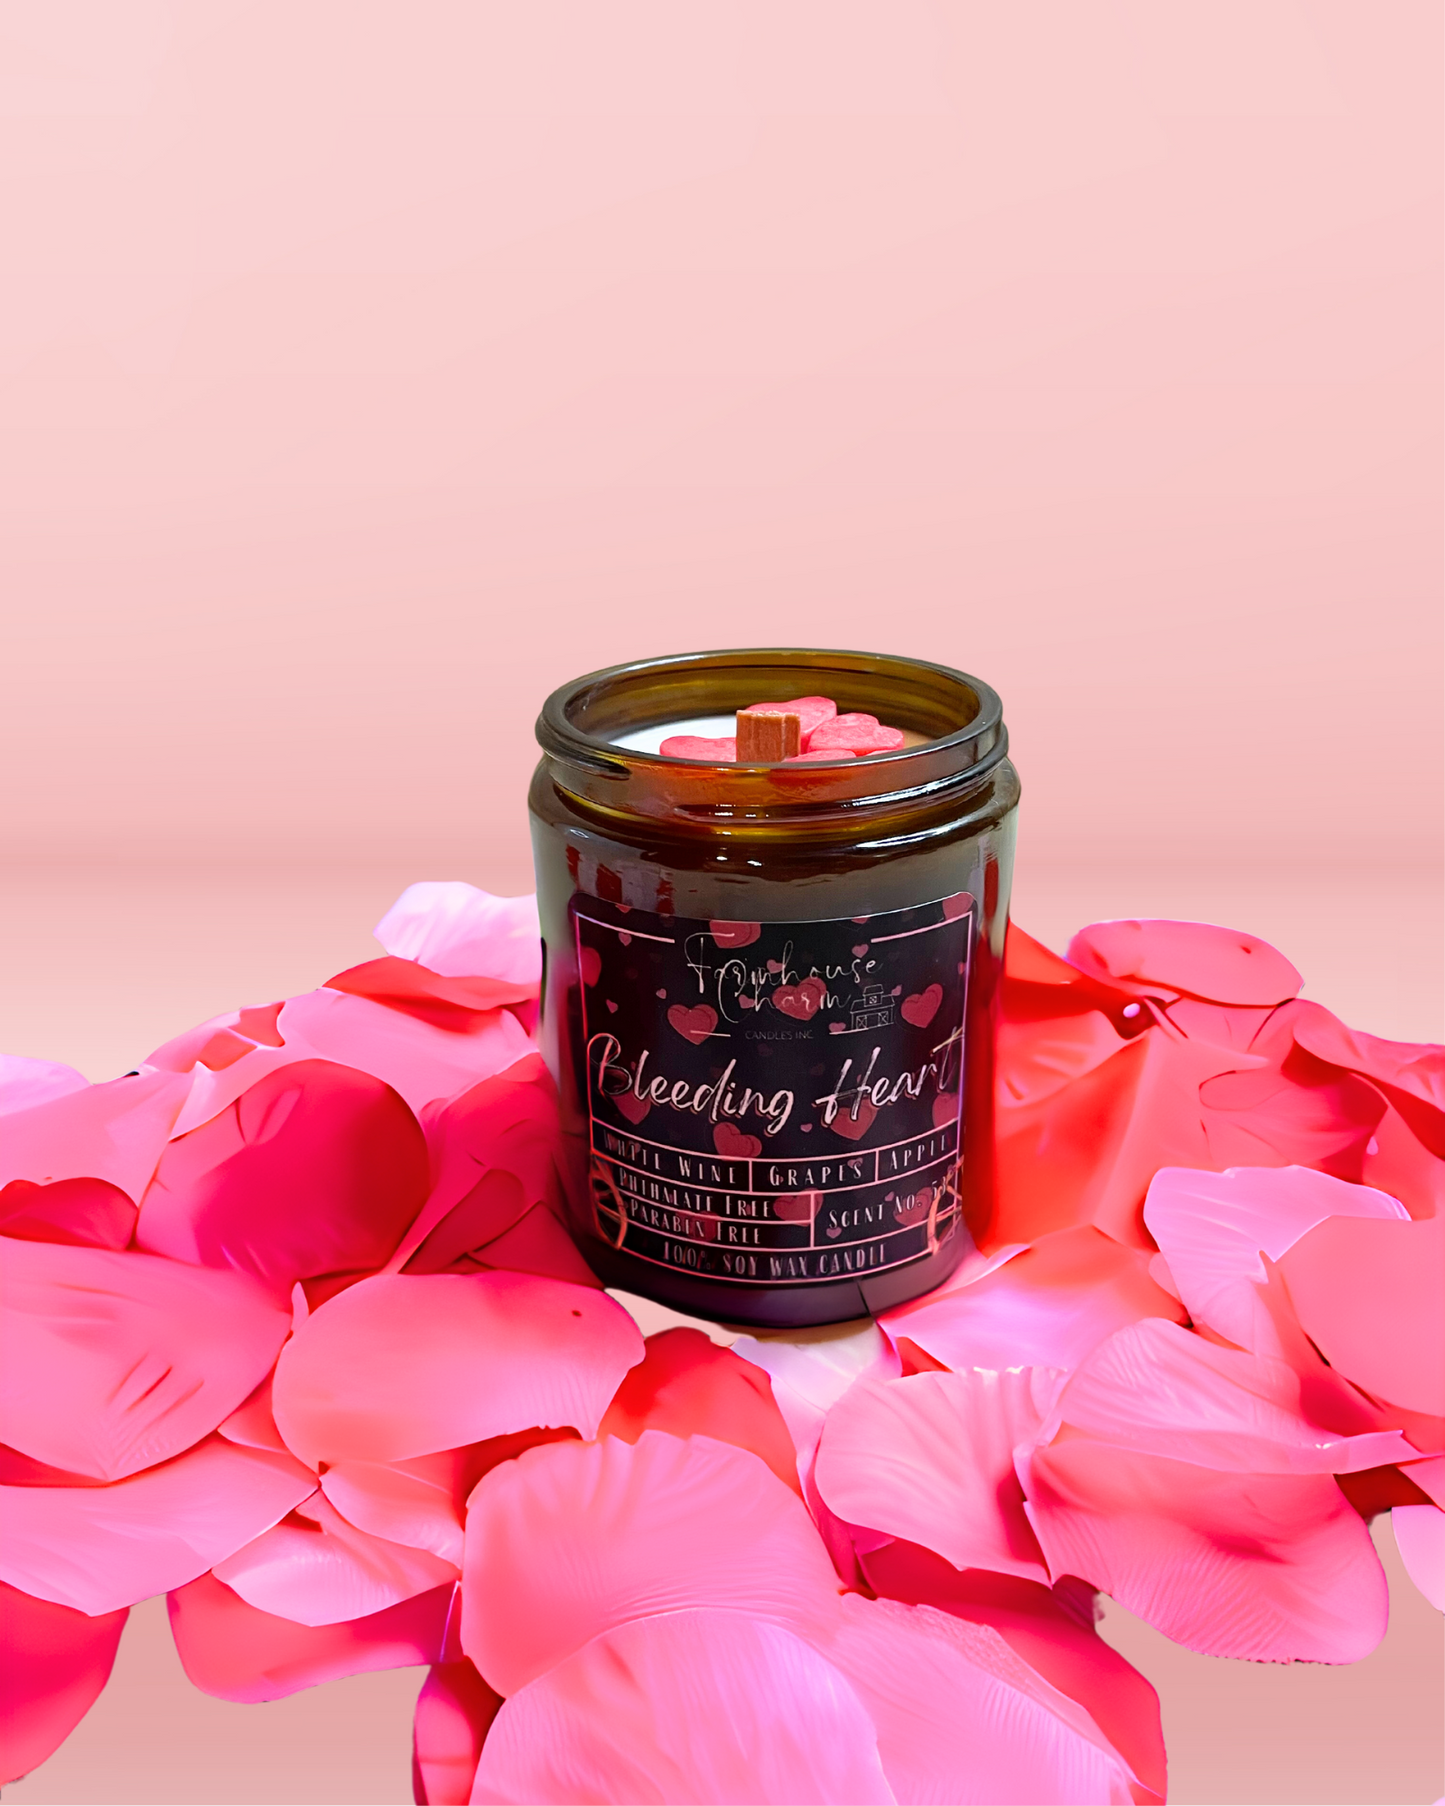 Get ready to swoon over Bleeding Heart Soy Candle. This one-of-a-kind scent is a delightful mix of Pinot Grigio wine, juicy grapes, crisp apples, with a citrusy zing to round it off. The Pinot Grigio gives it an elegant touch, while the fruity goodness of grapes and apple balance it out. Plus, the red heart toppings that appear to bleed make it a perfect Valentine's Day gift for your nose! www.farmhousecharmcandles.com